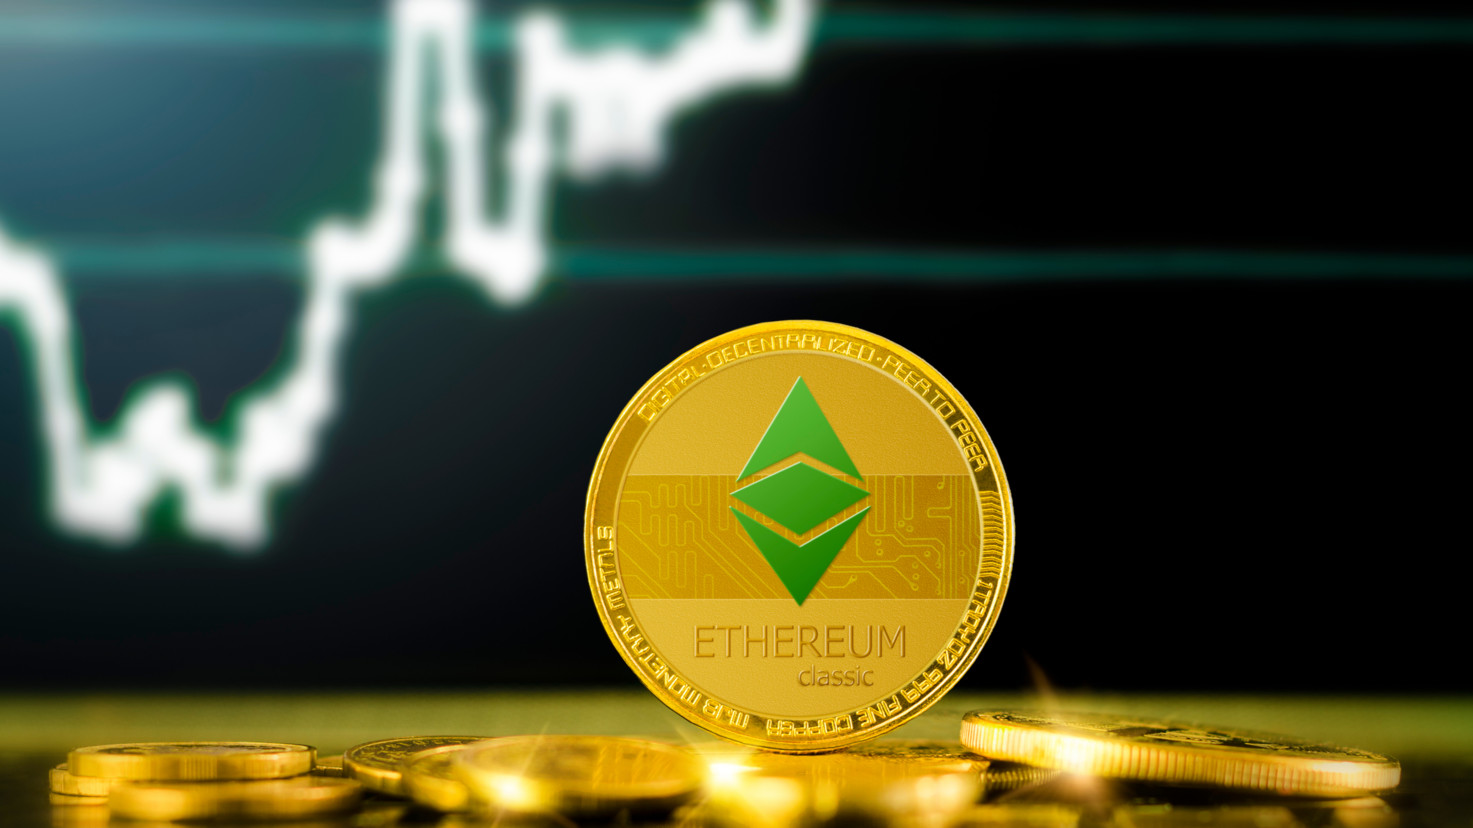 Will ethereum classic keep going up